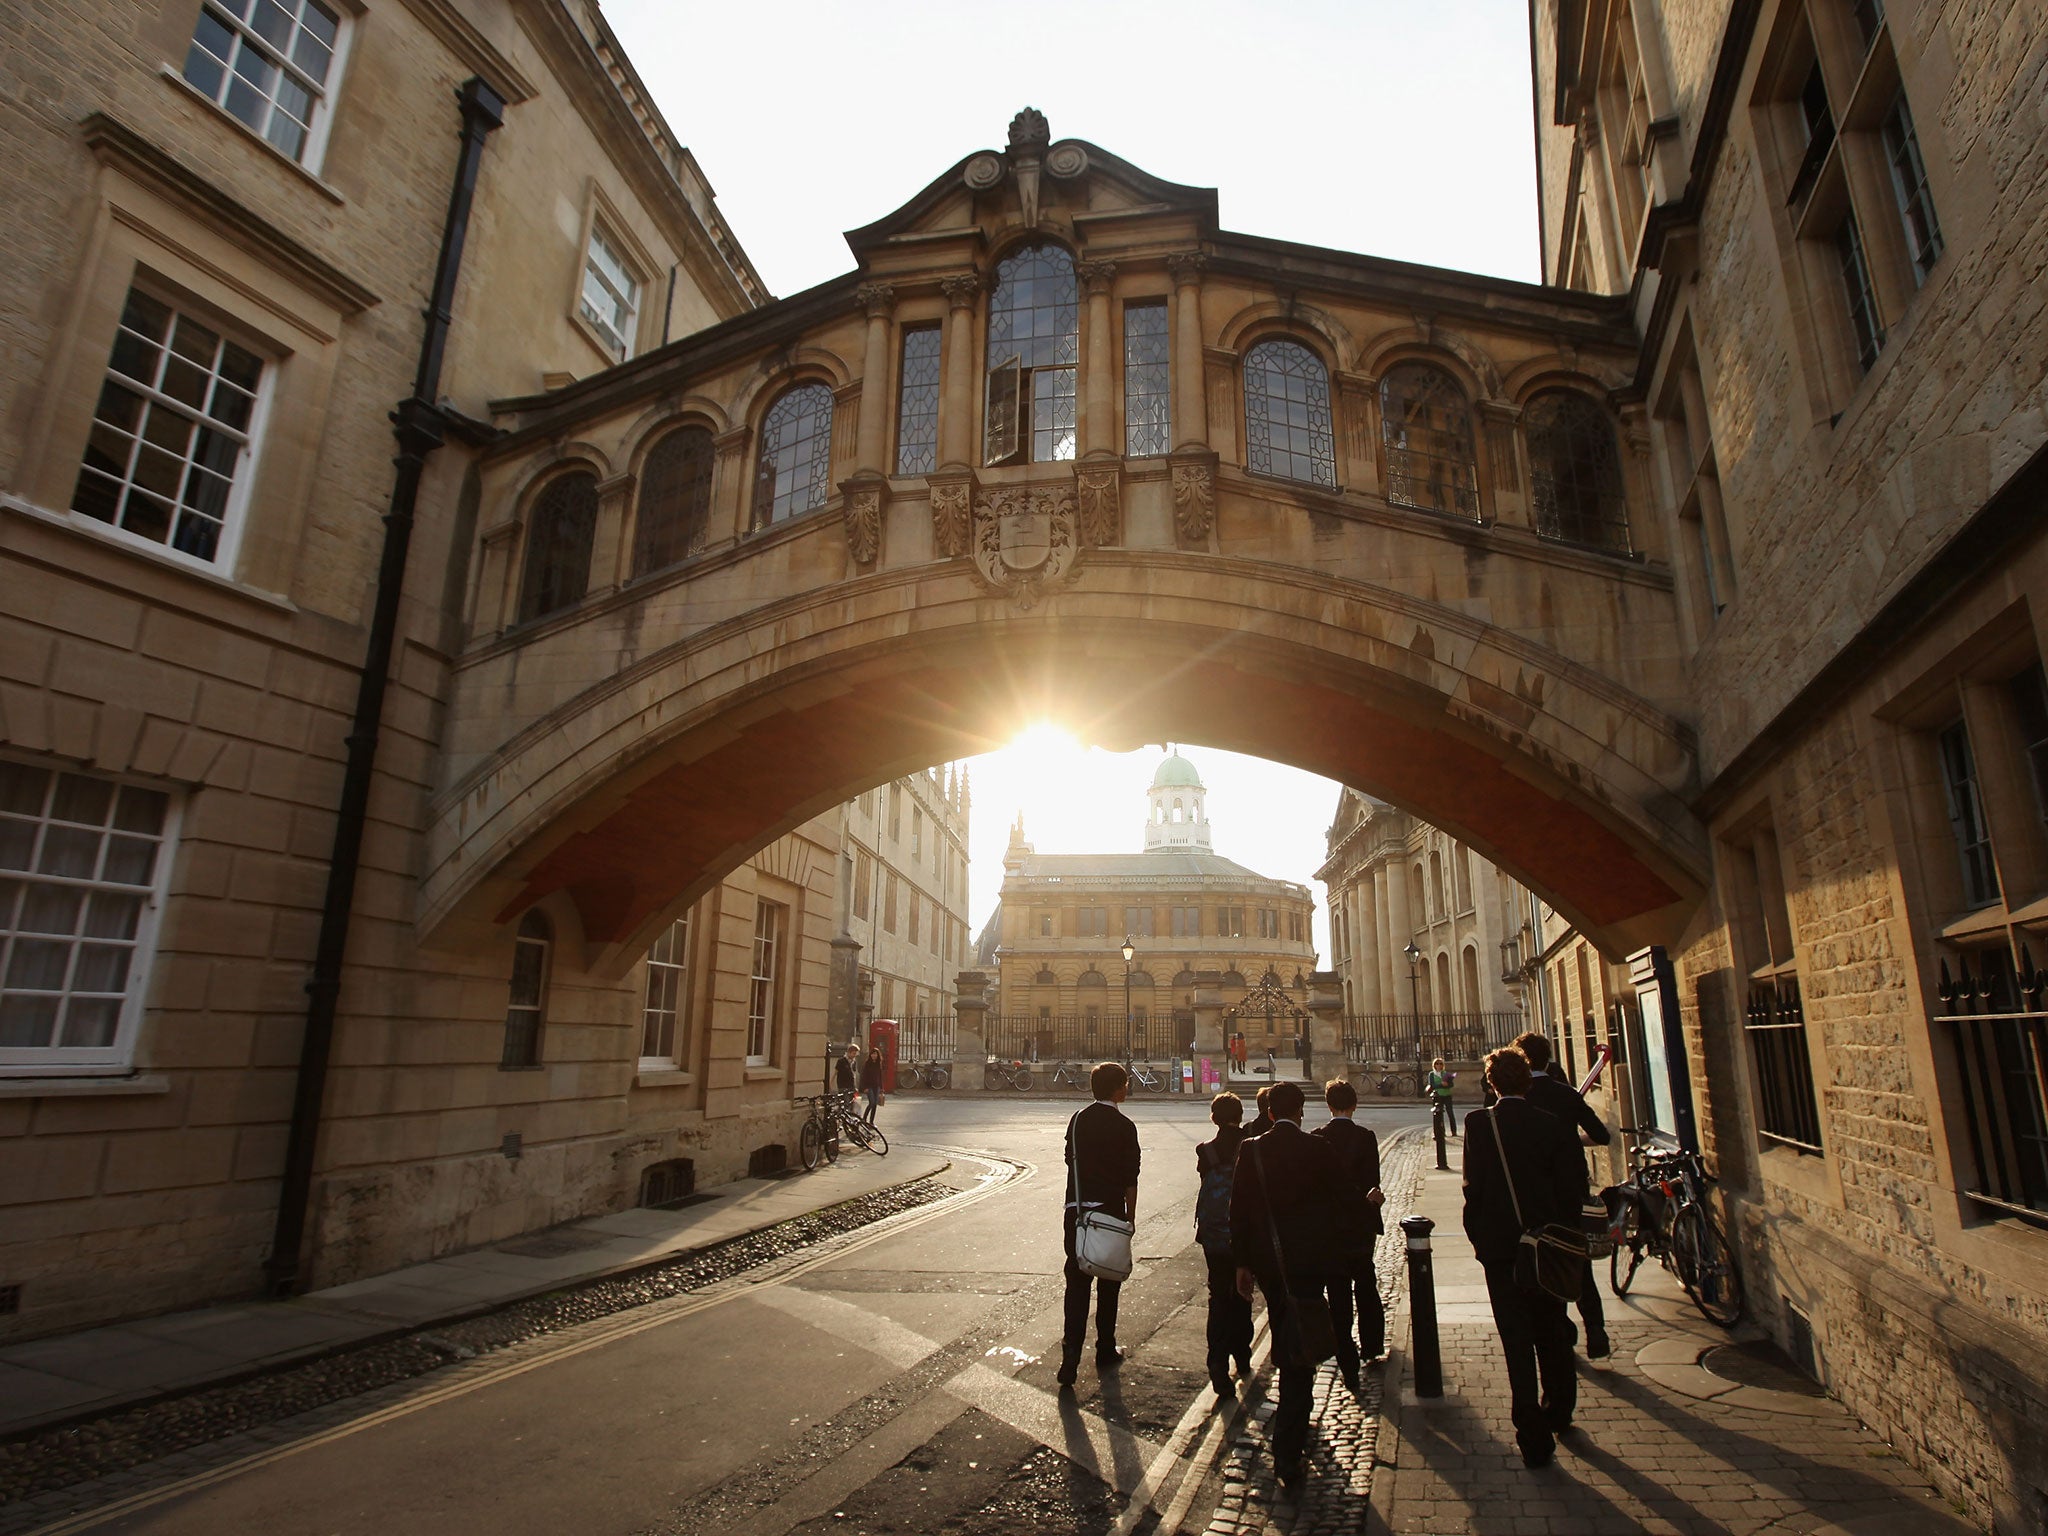 Universities, especially Oxford and Cambridge, are safe spaces for rich white men